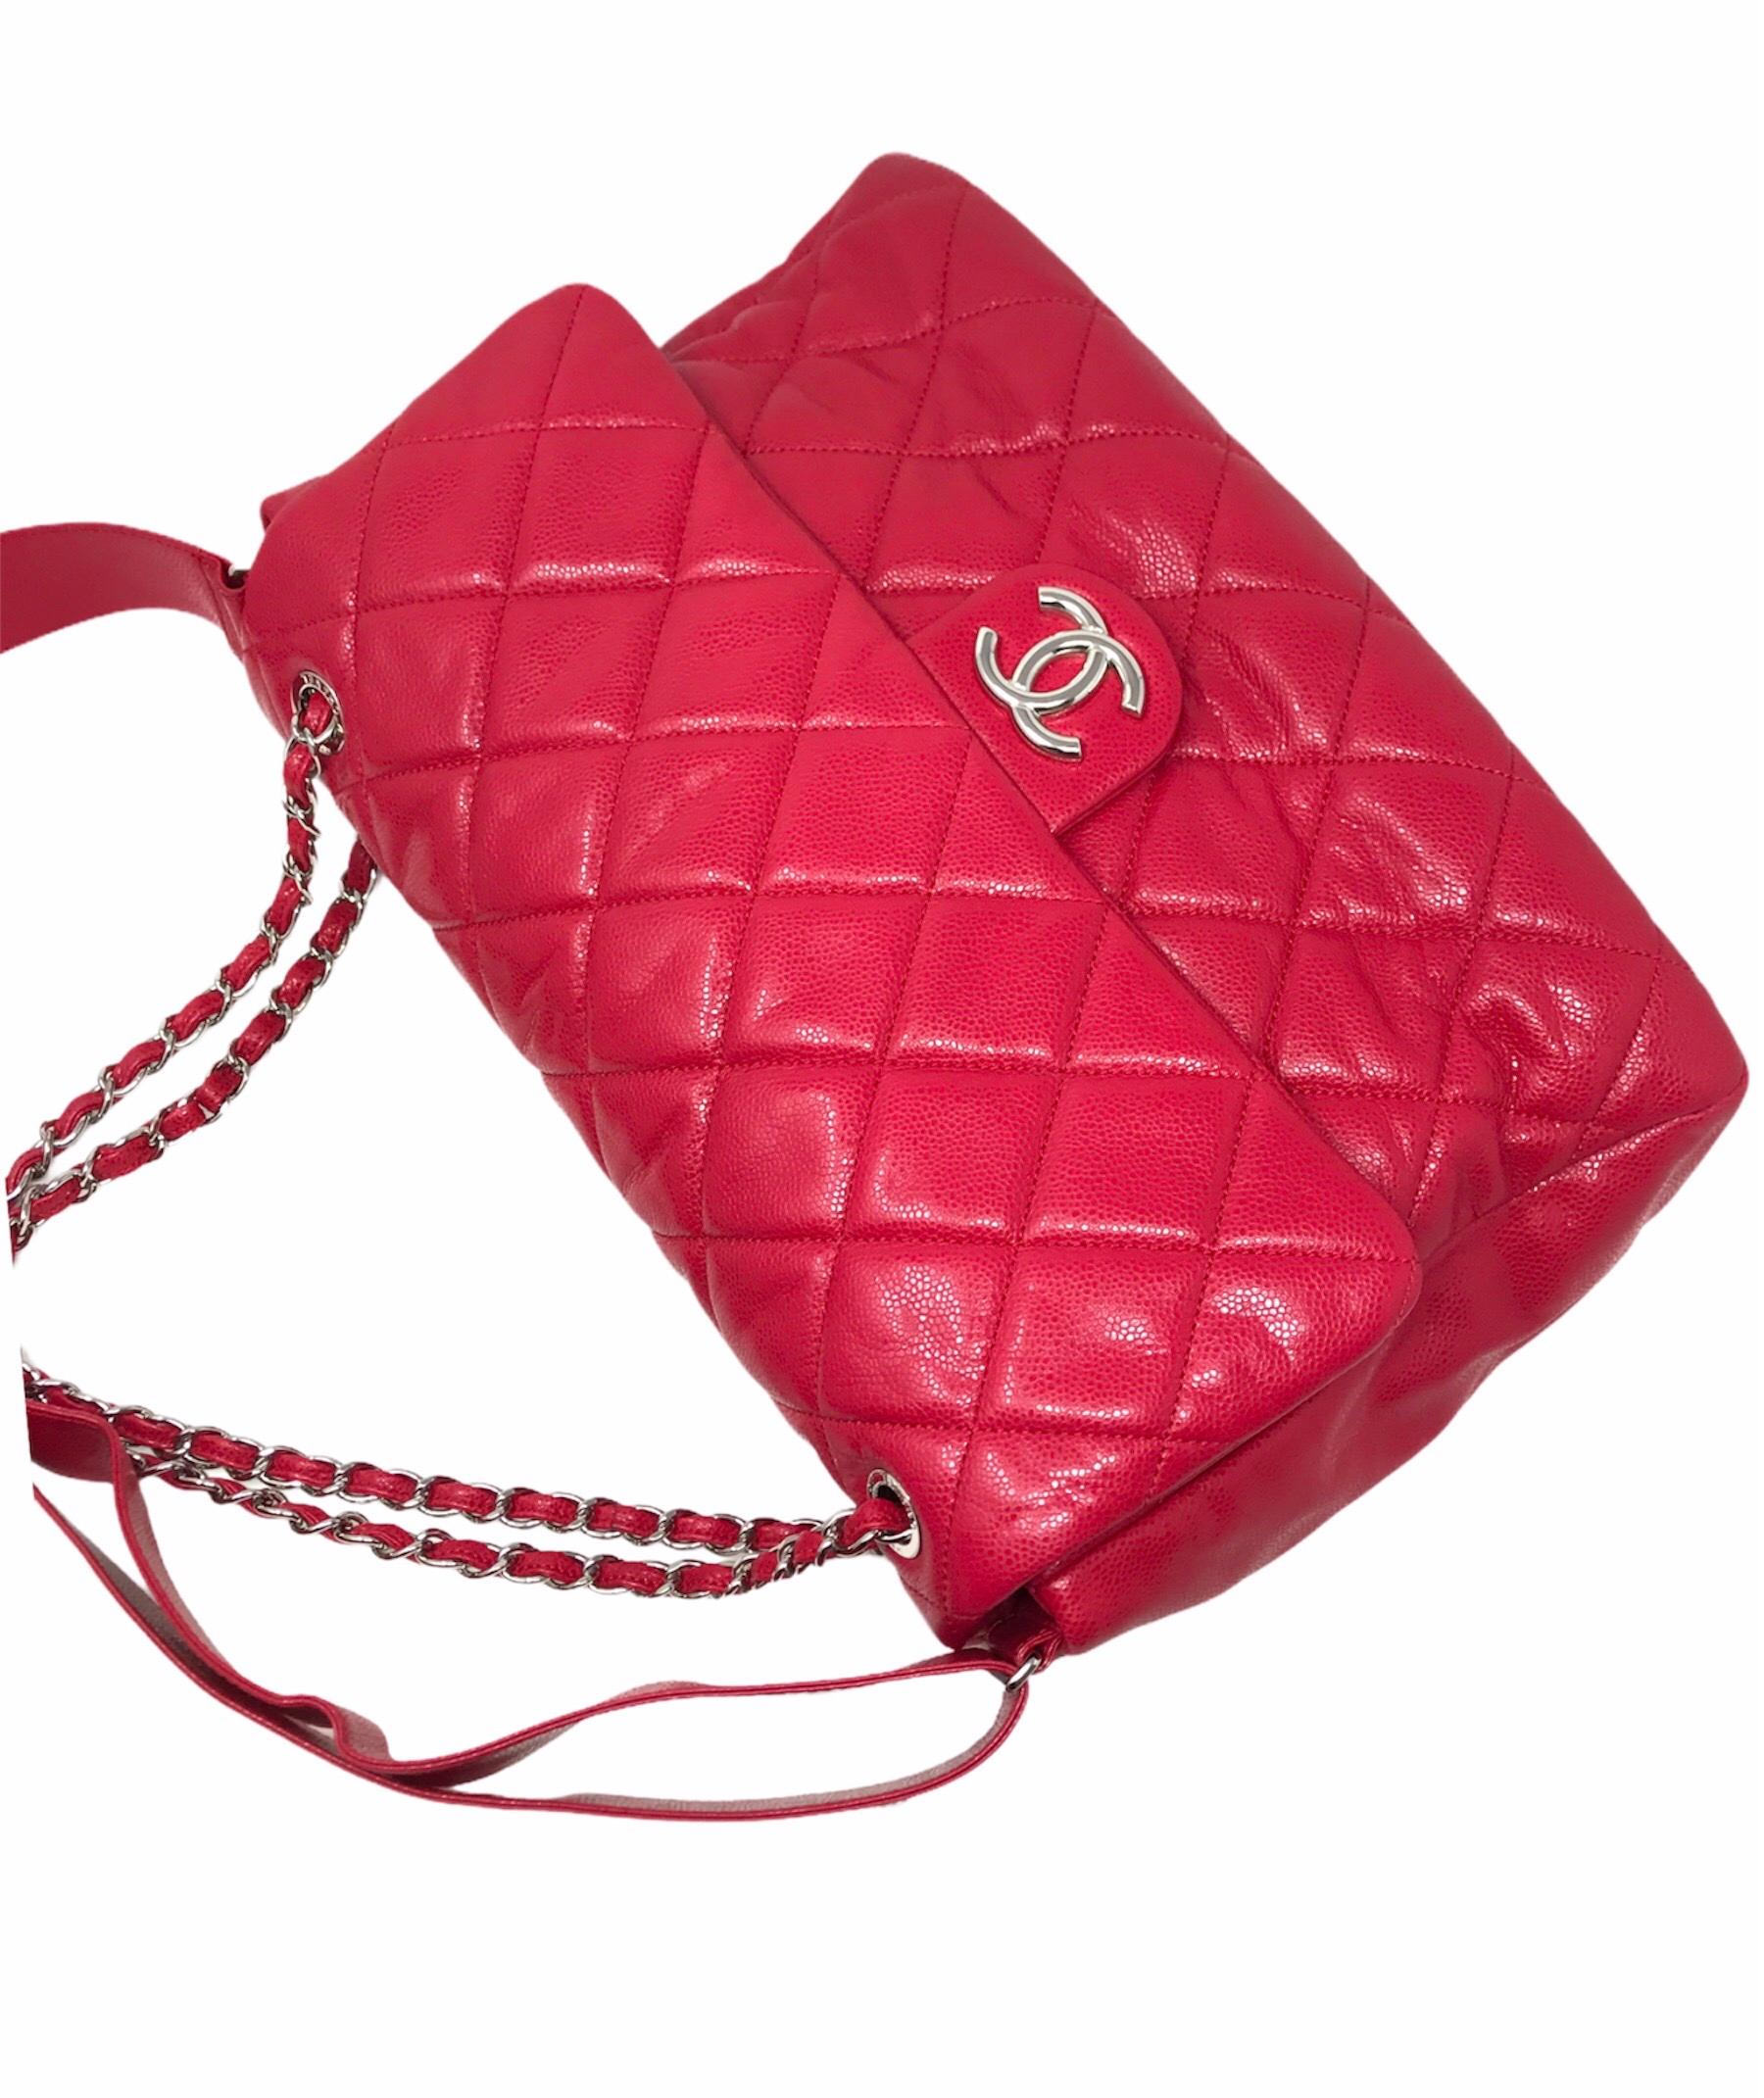 CHANEL:  Timeless/Classique Leather Bag In Good Condition For Sale In Milan, IT